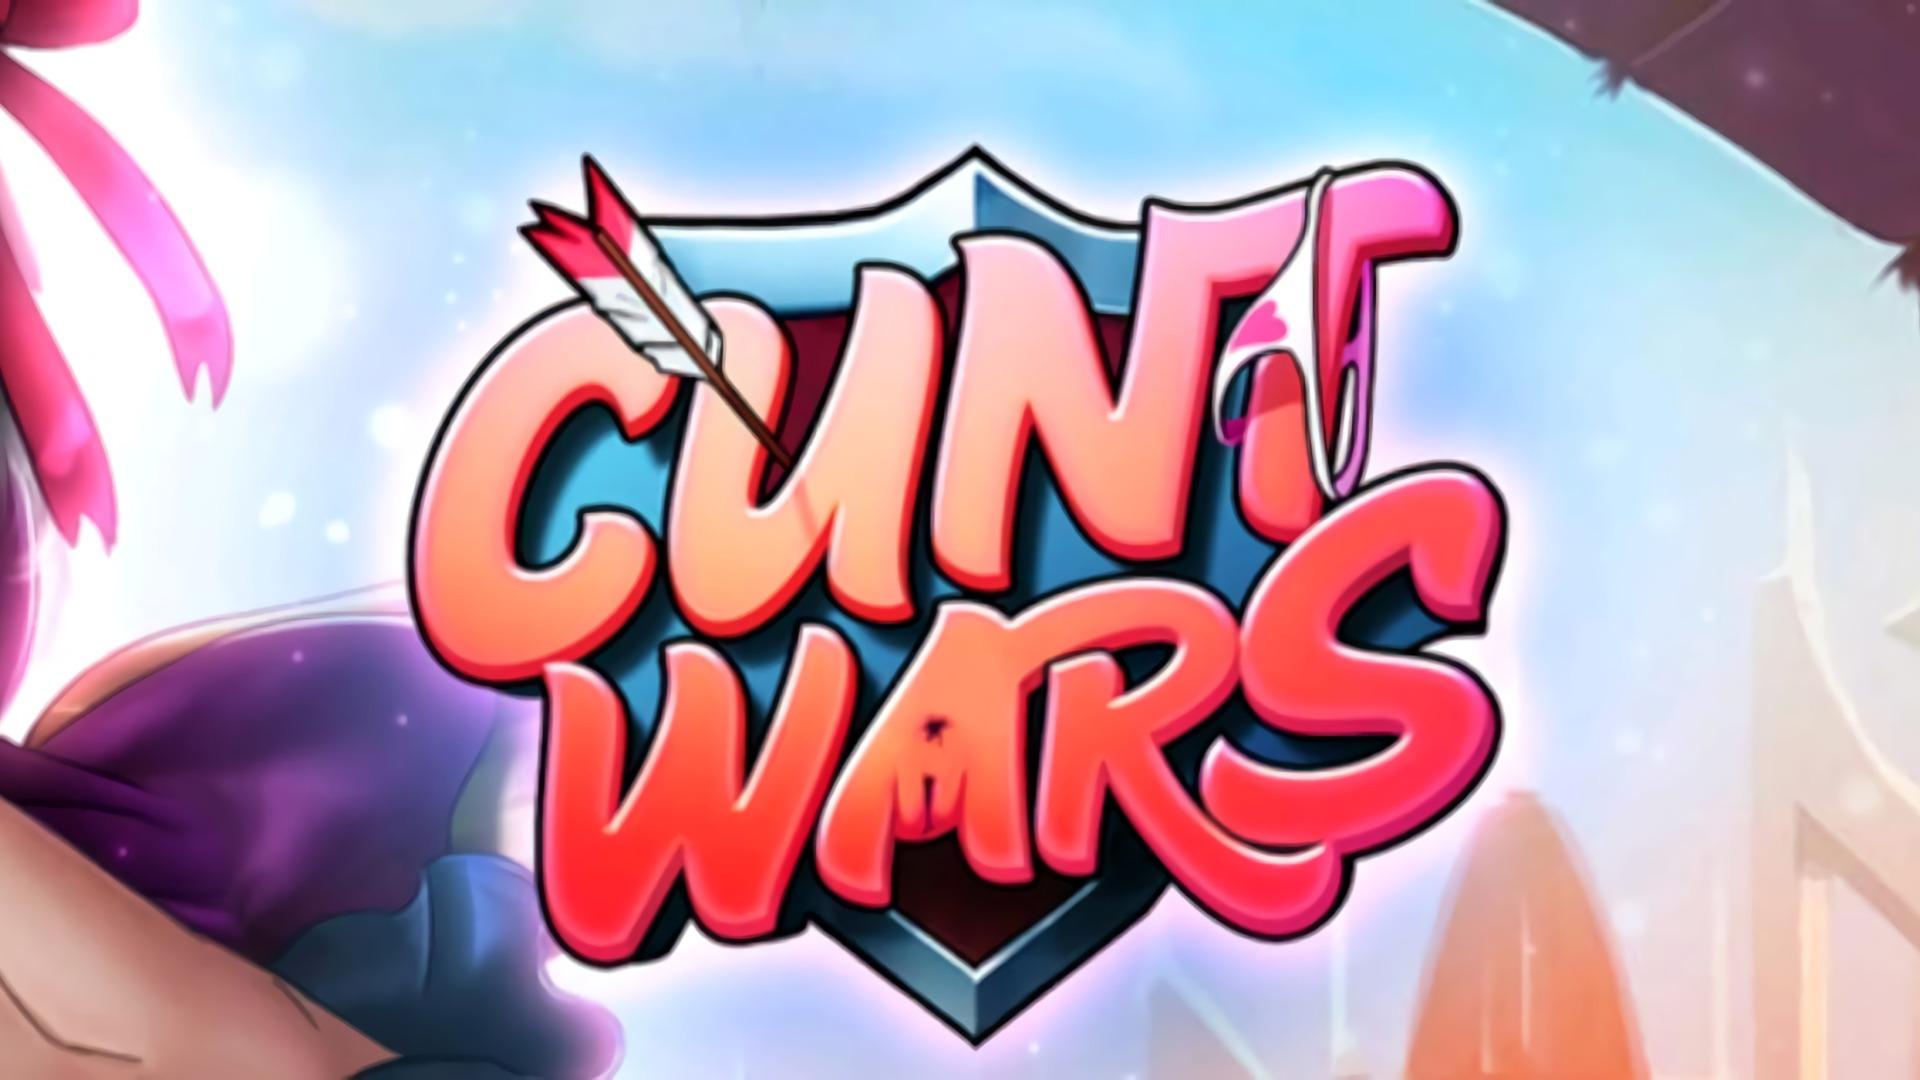 Cunt wars game compilations